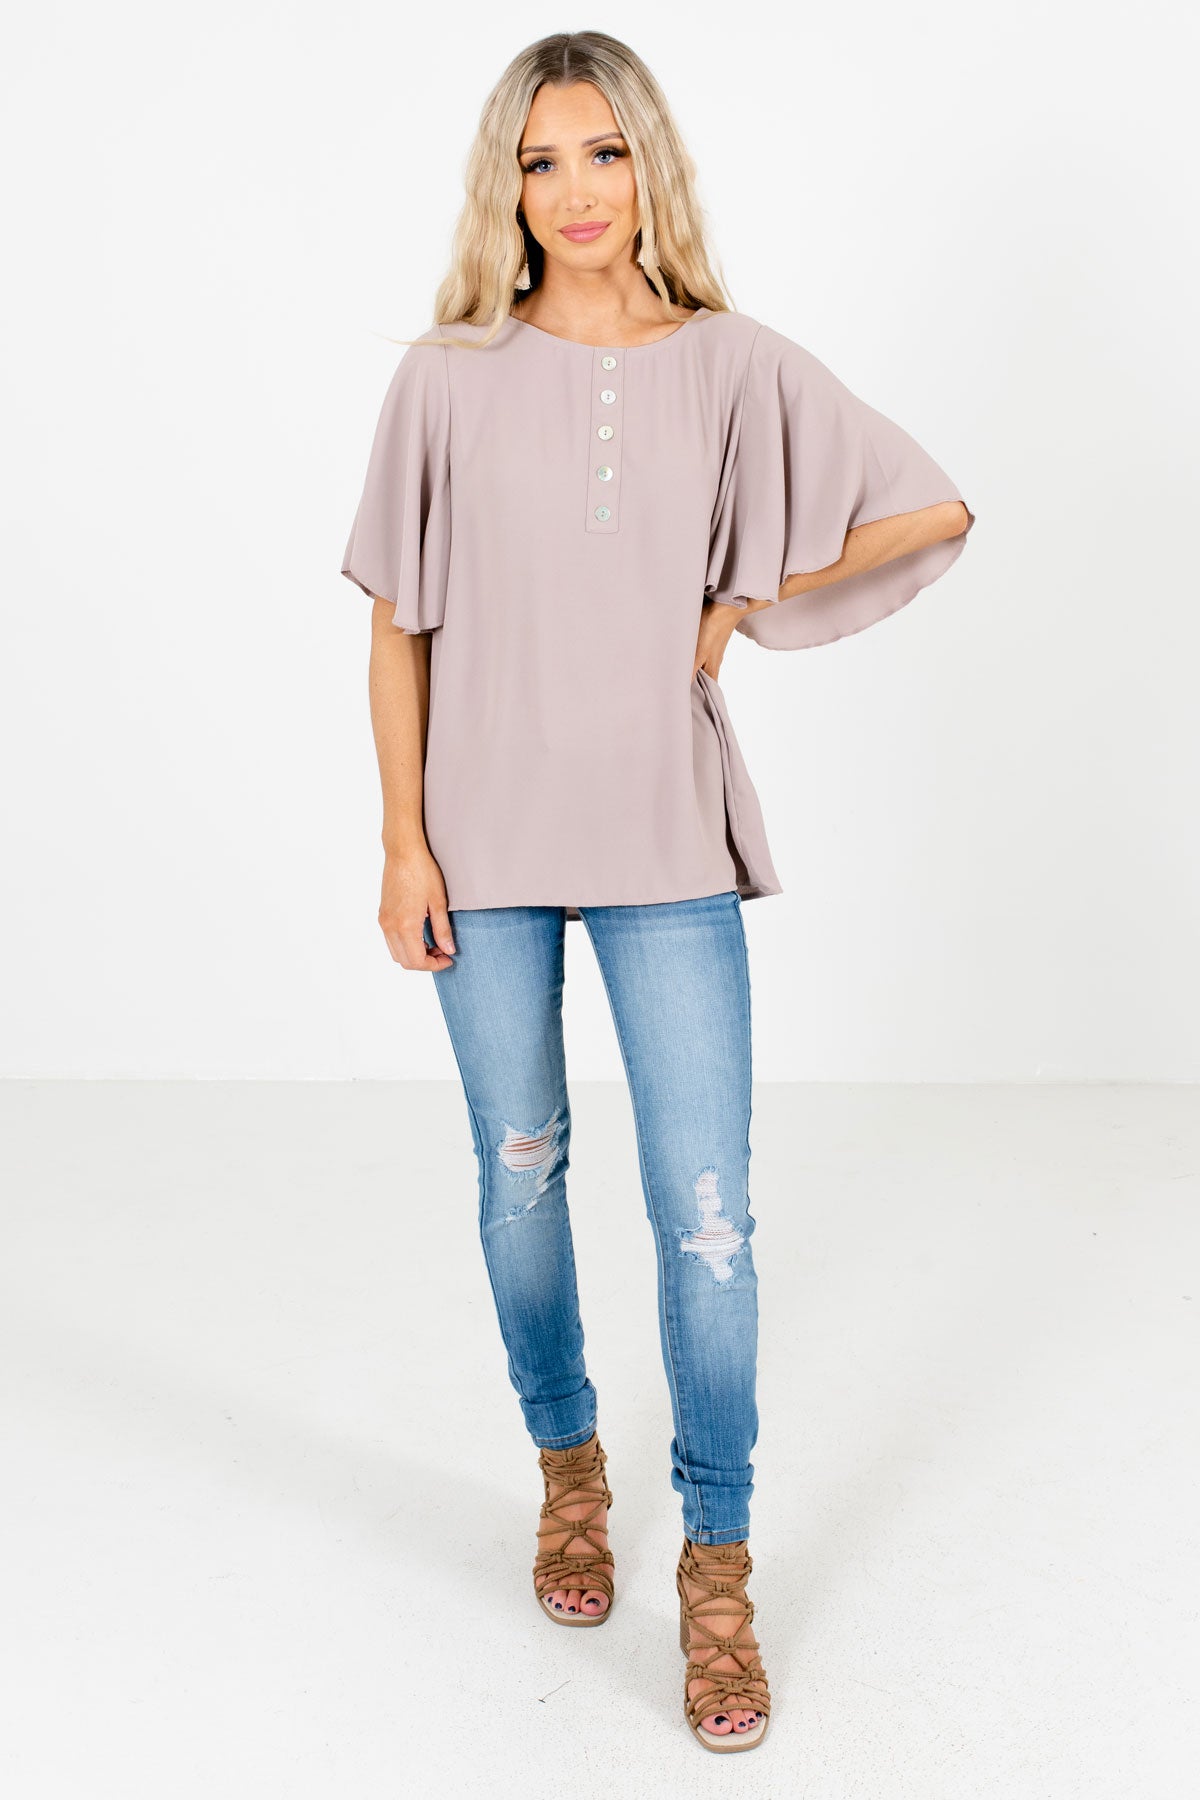 Brown Affordable Online Boutique Clothing for Women